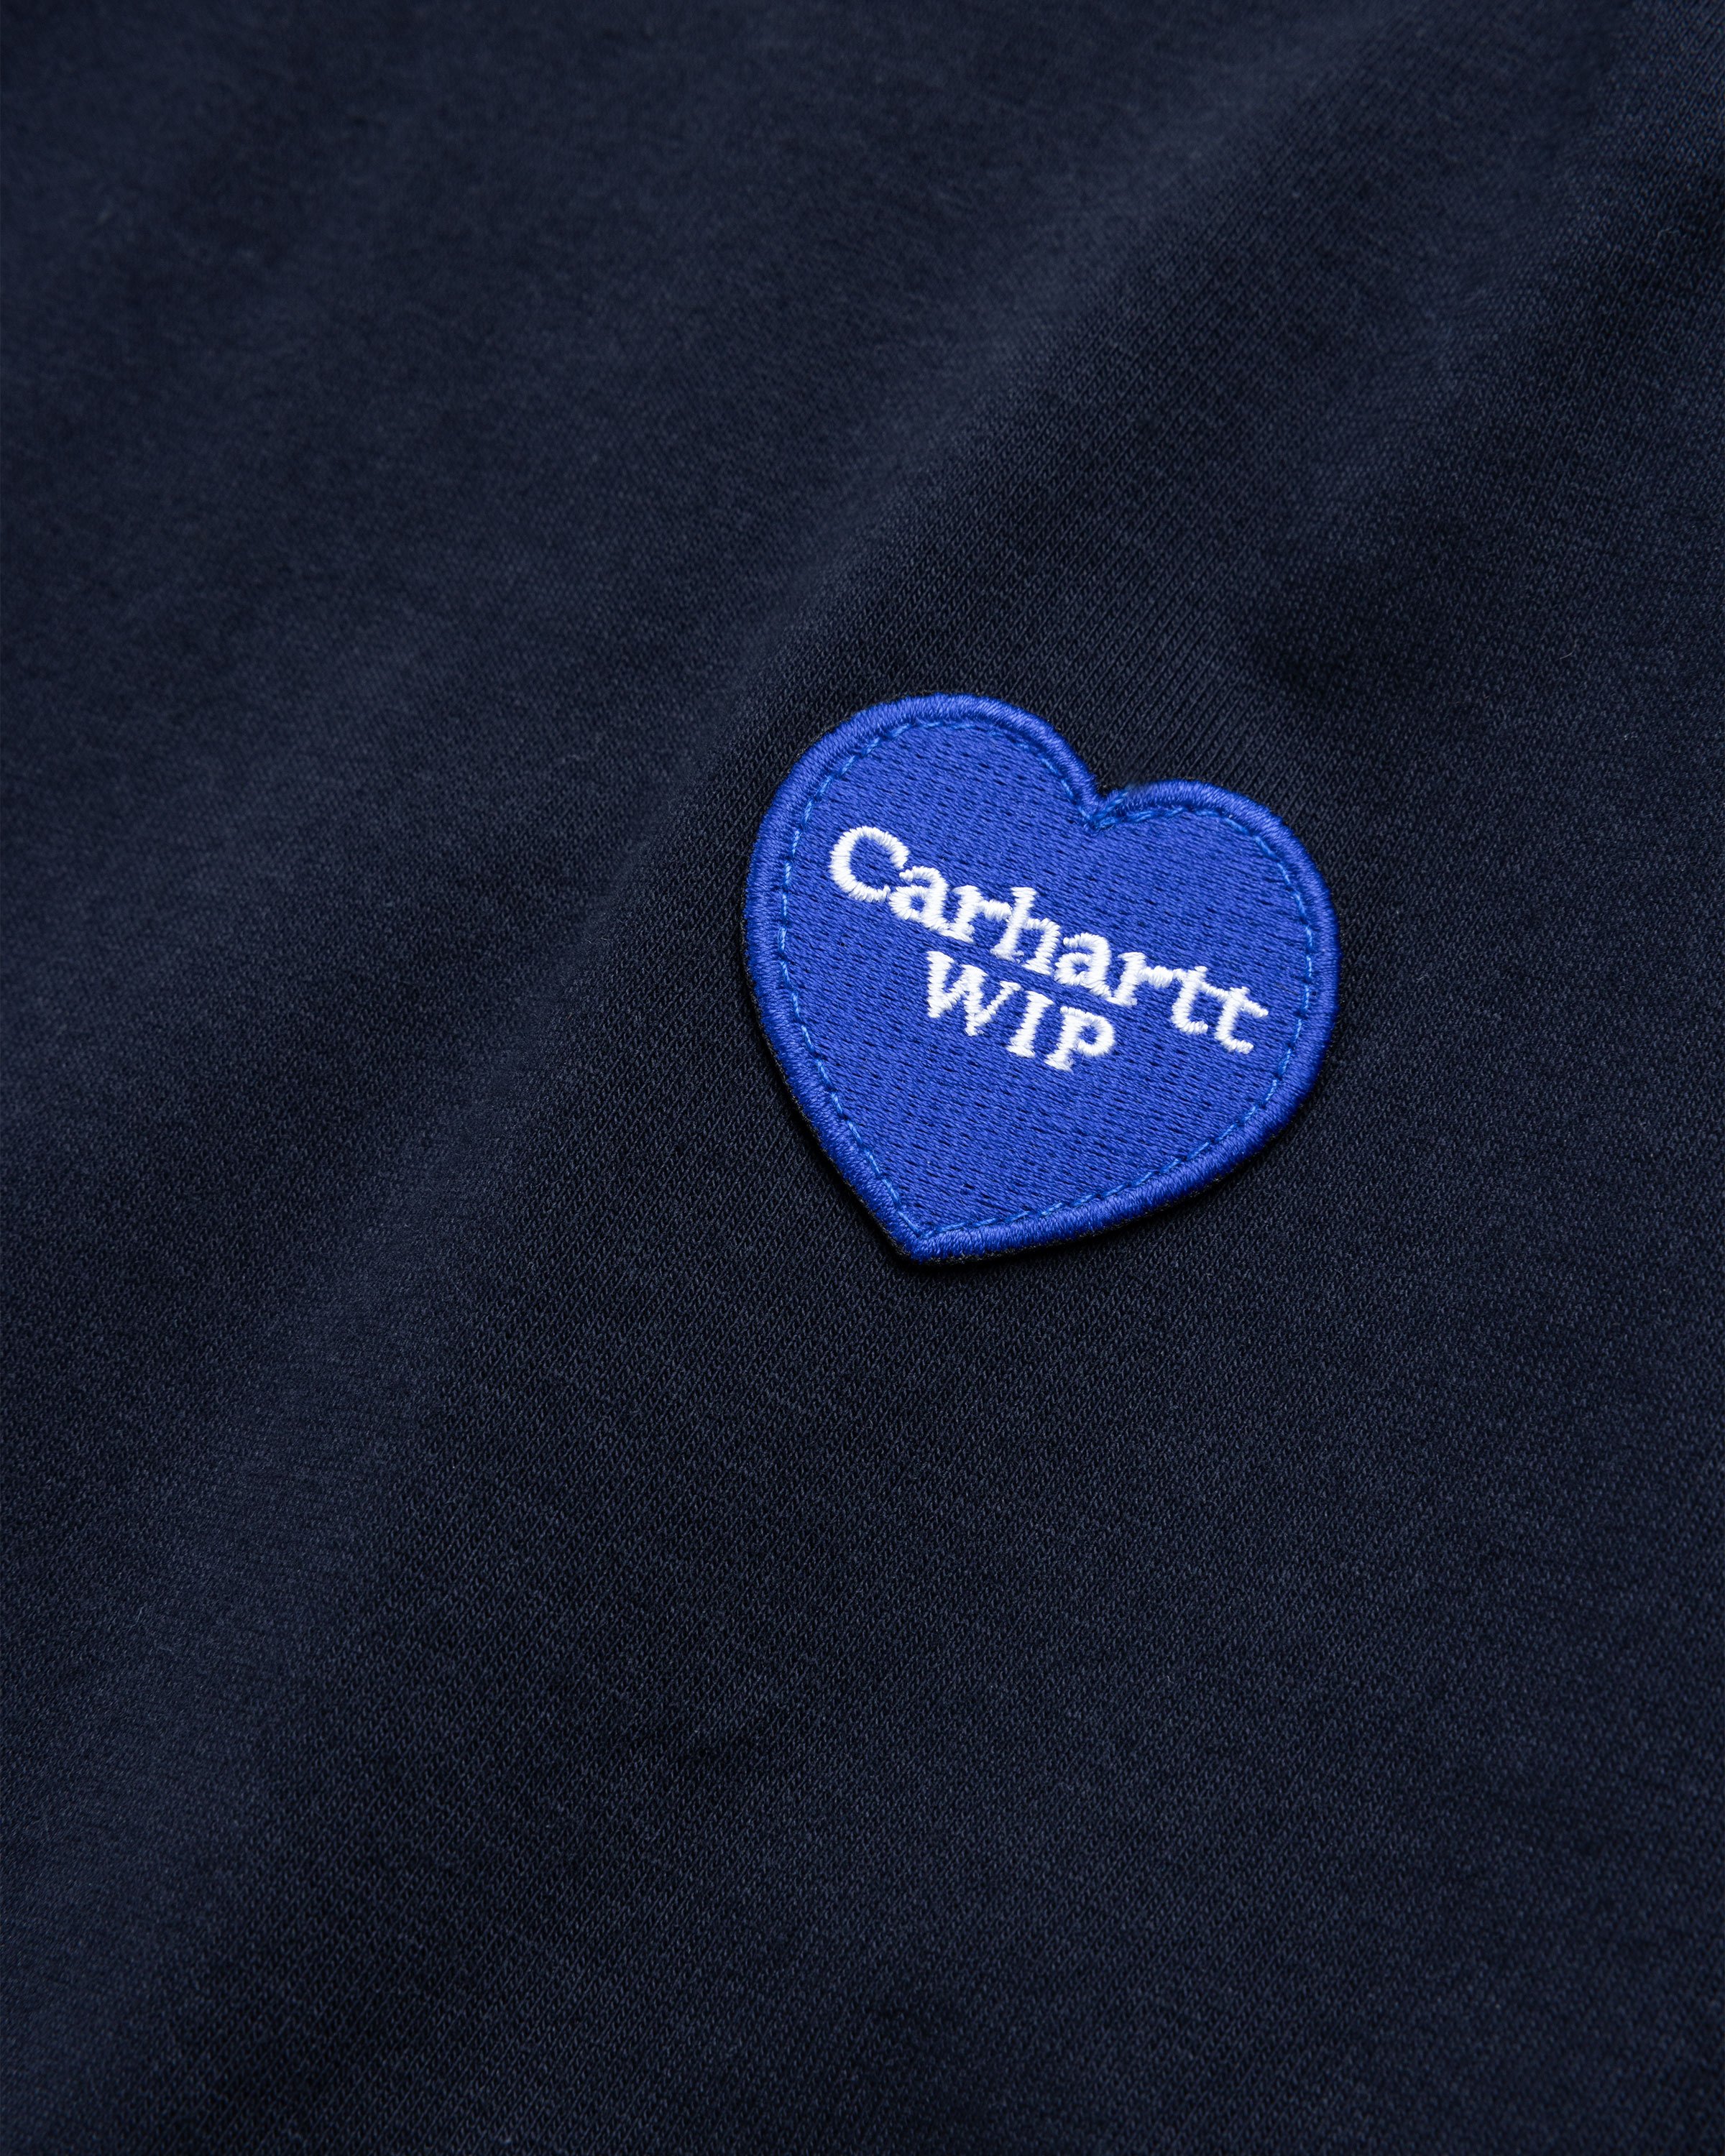 Carhartt WIP - S/S Heart Patch T-Shirt Blue - Clothing - Blue - Image 6